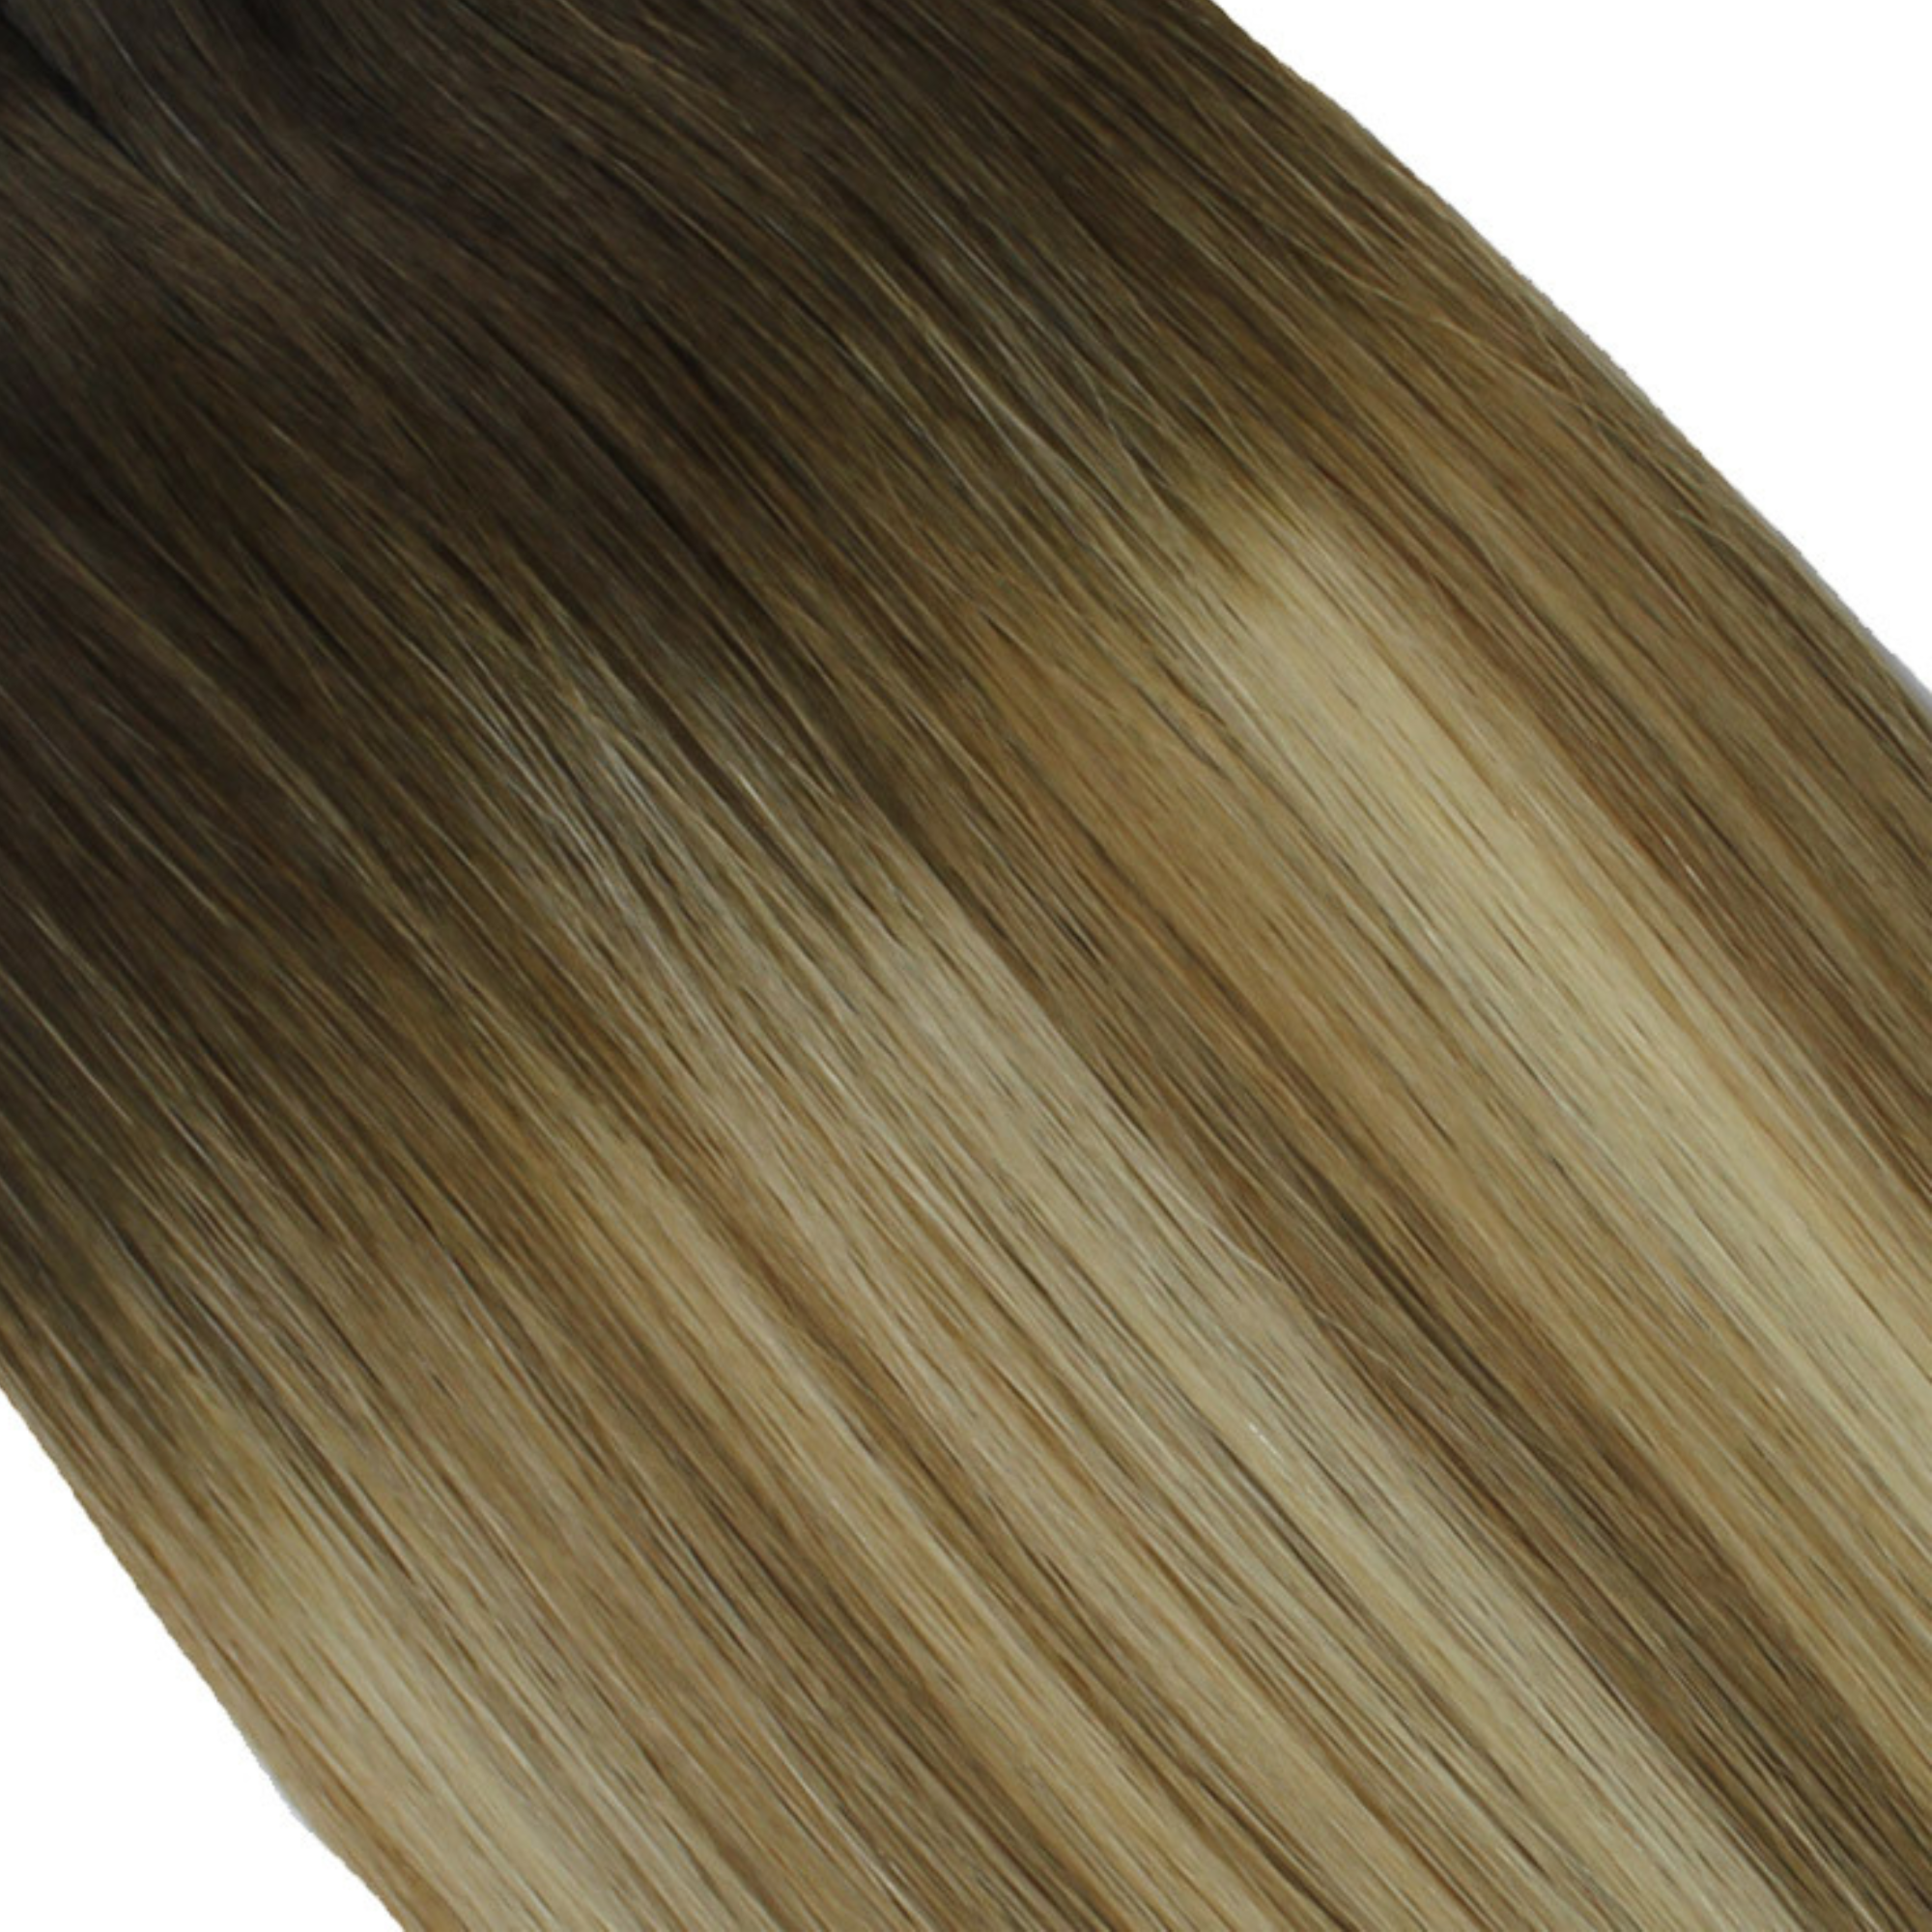 "hair rehab london 14" tape hair extensions shade swatch titled rooted supermodel"